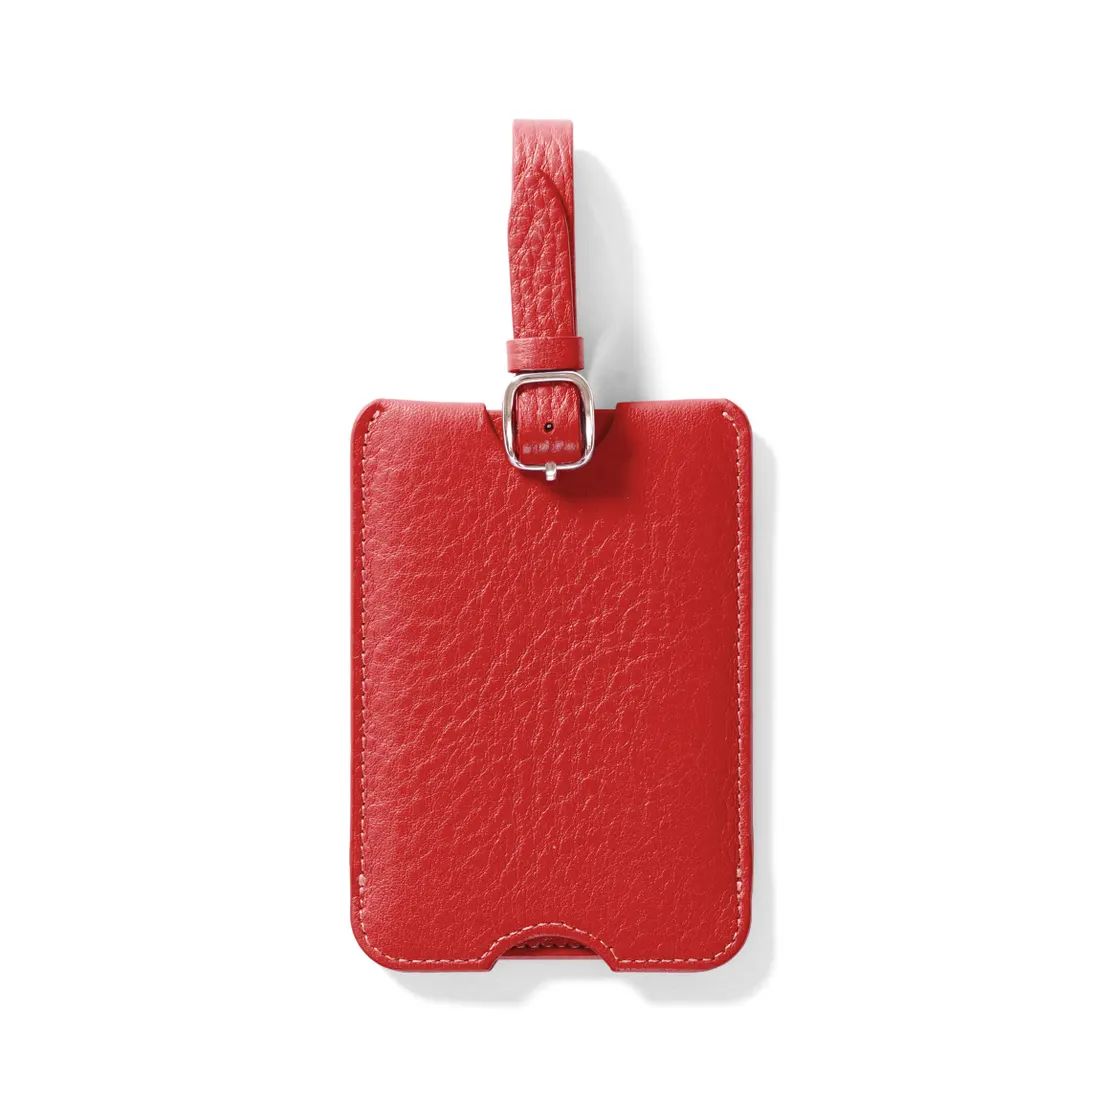 Deluxe Luggage Tag | Leatherology